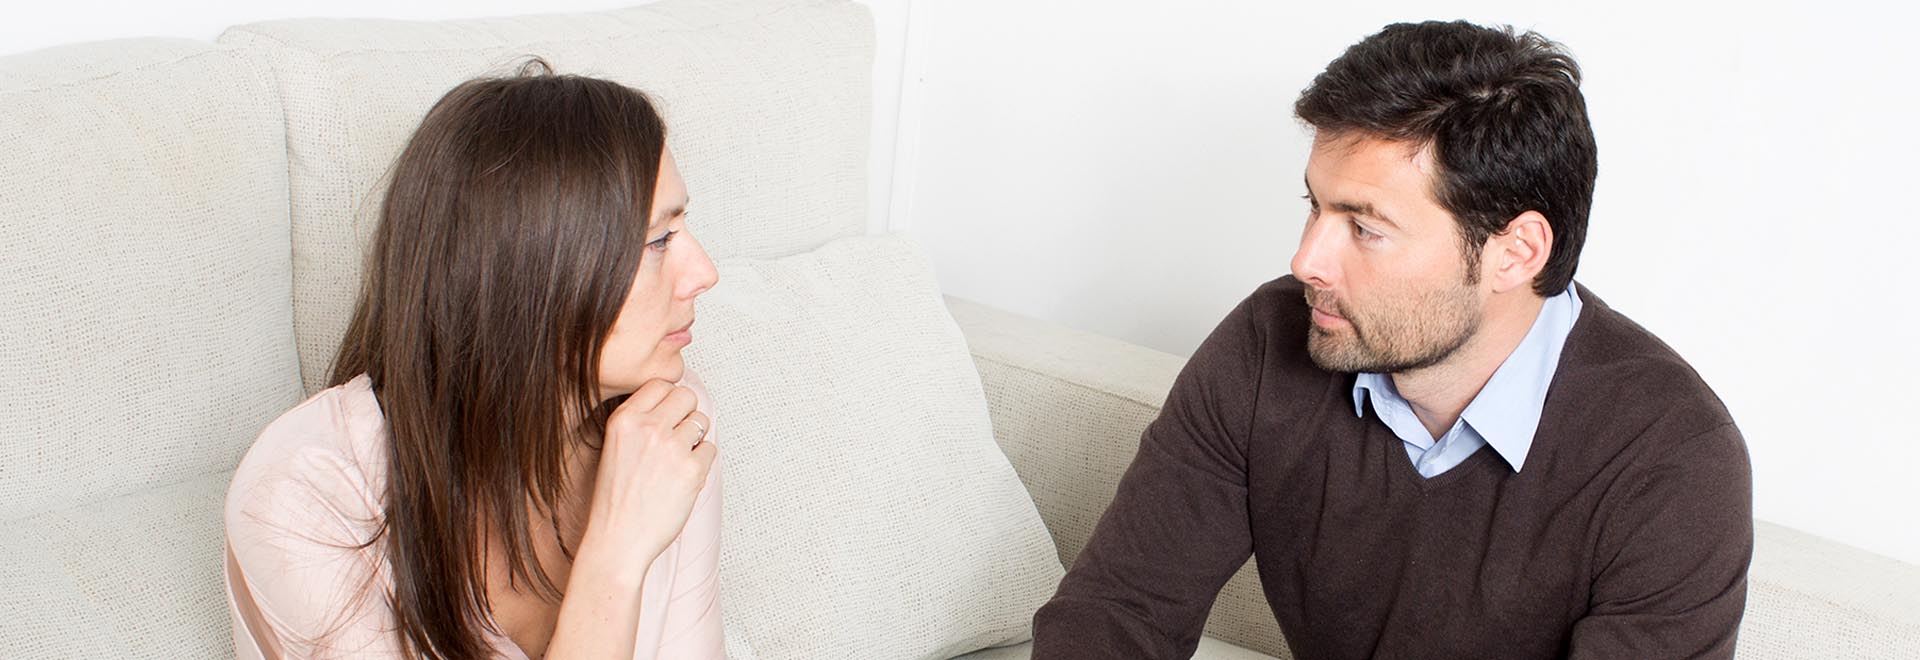  couple in difficult discussion on a sofa